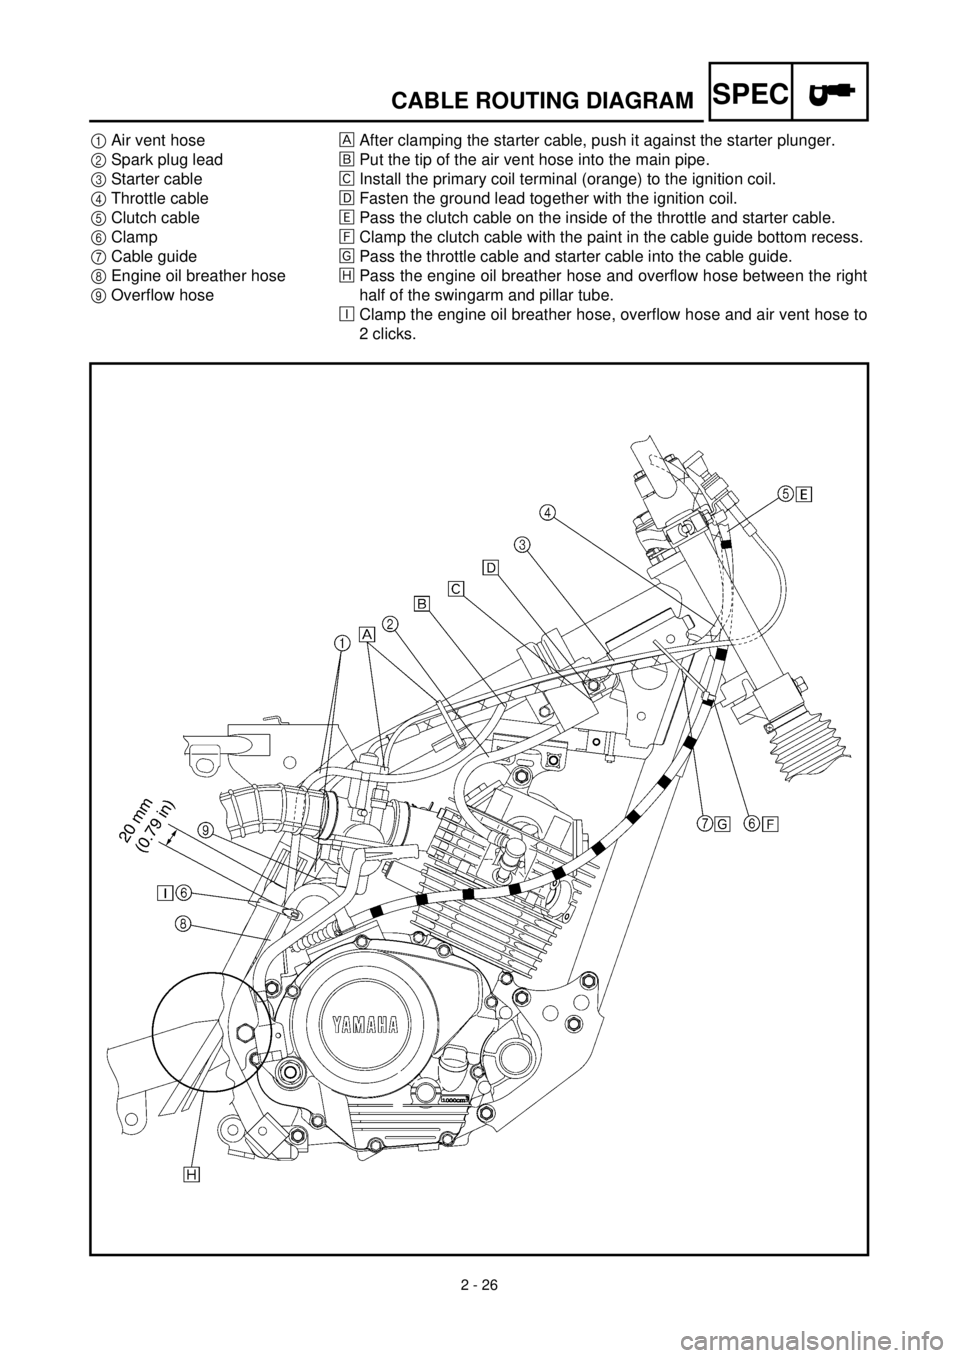 YAMAHA TTR125 2001 Owners Manual  
2 - 26
SPEC
 
CABLE ROUTING DIAGRAM 
1 
Air vent hose 
2 
Spark plug lead 
3 
Starter cable 
4 
Throttle cable 
5 
Clutch cable 
6 
Clamp 
7 
Cable guide 
8 
Engine oil breather hose 
9 
Overflow ho